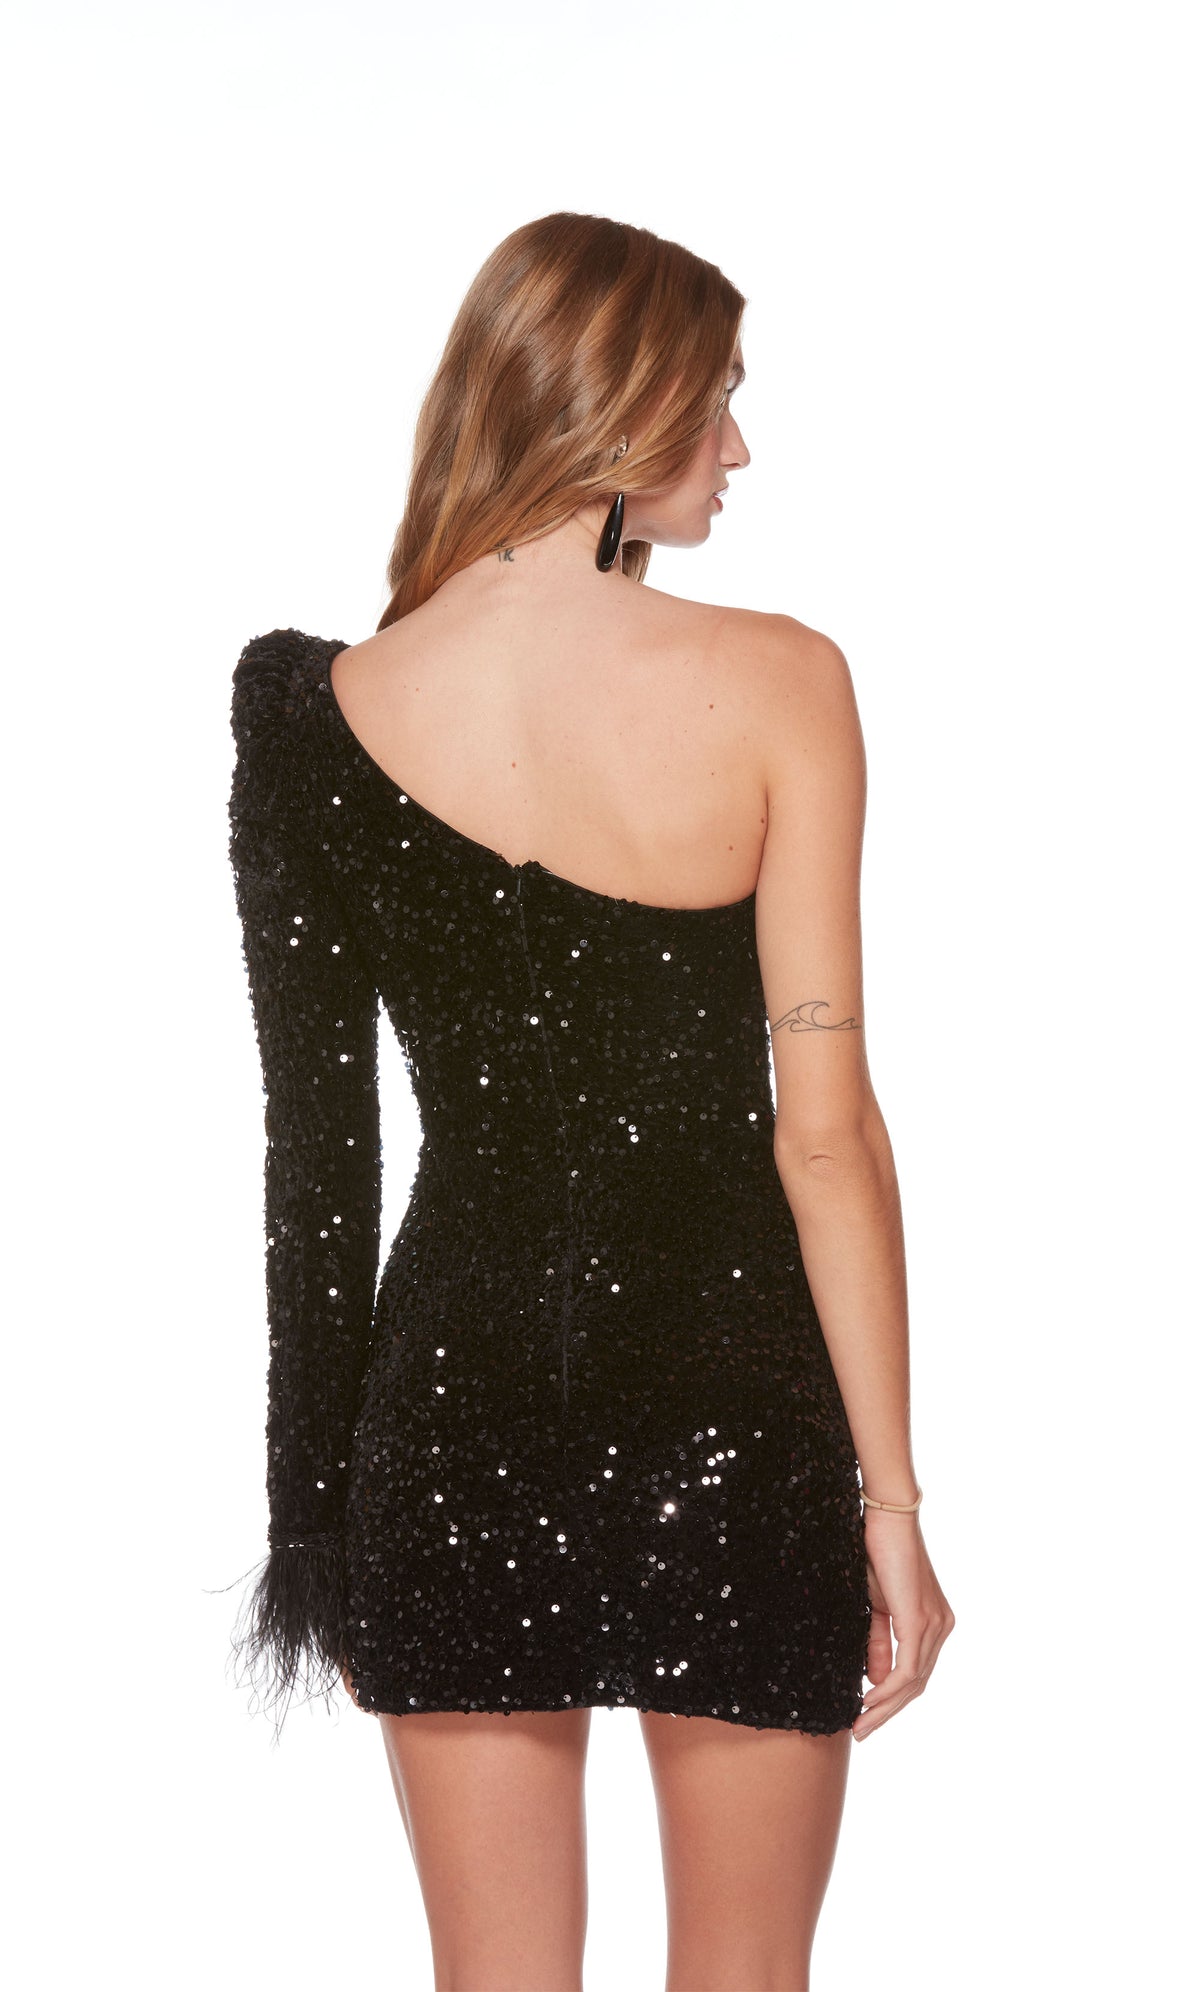 A chic, one-shoulder short designer dress highlighting a feather-trimmed sleeve and a zip-up back, in a sparkly black sequin fabric.